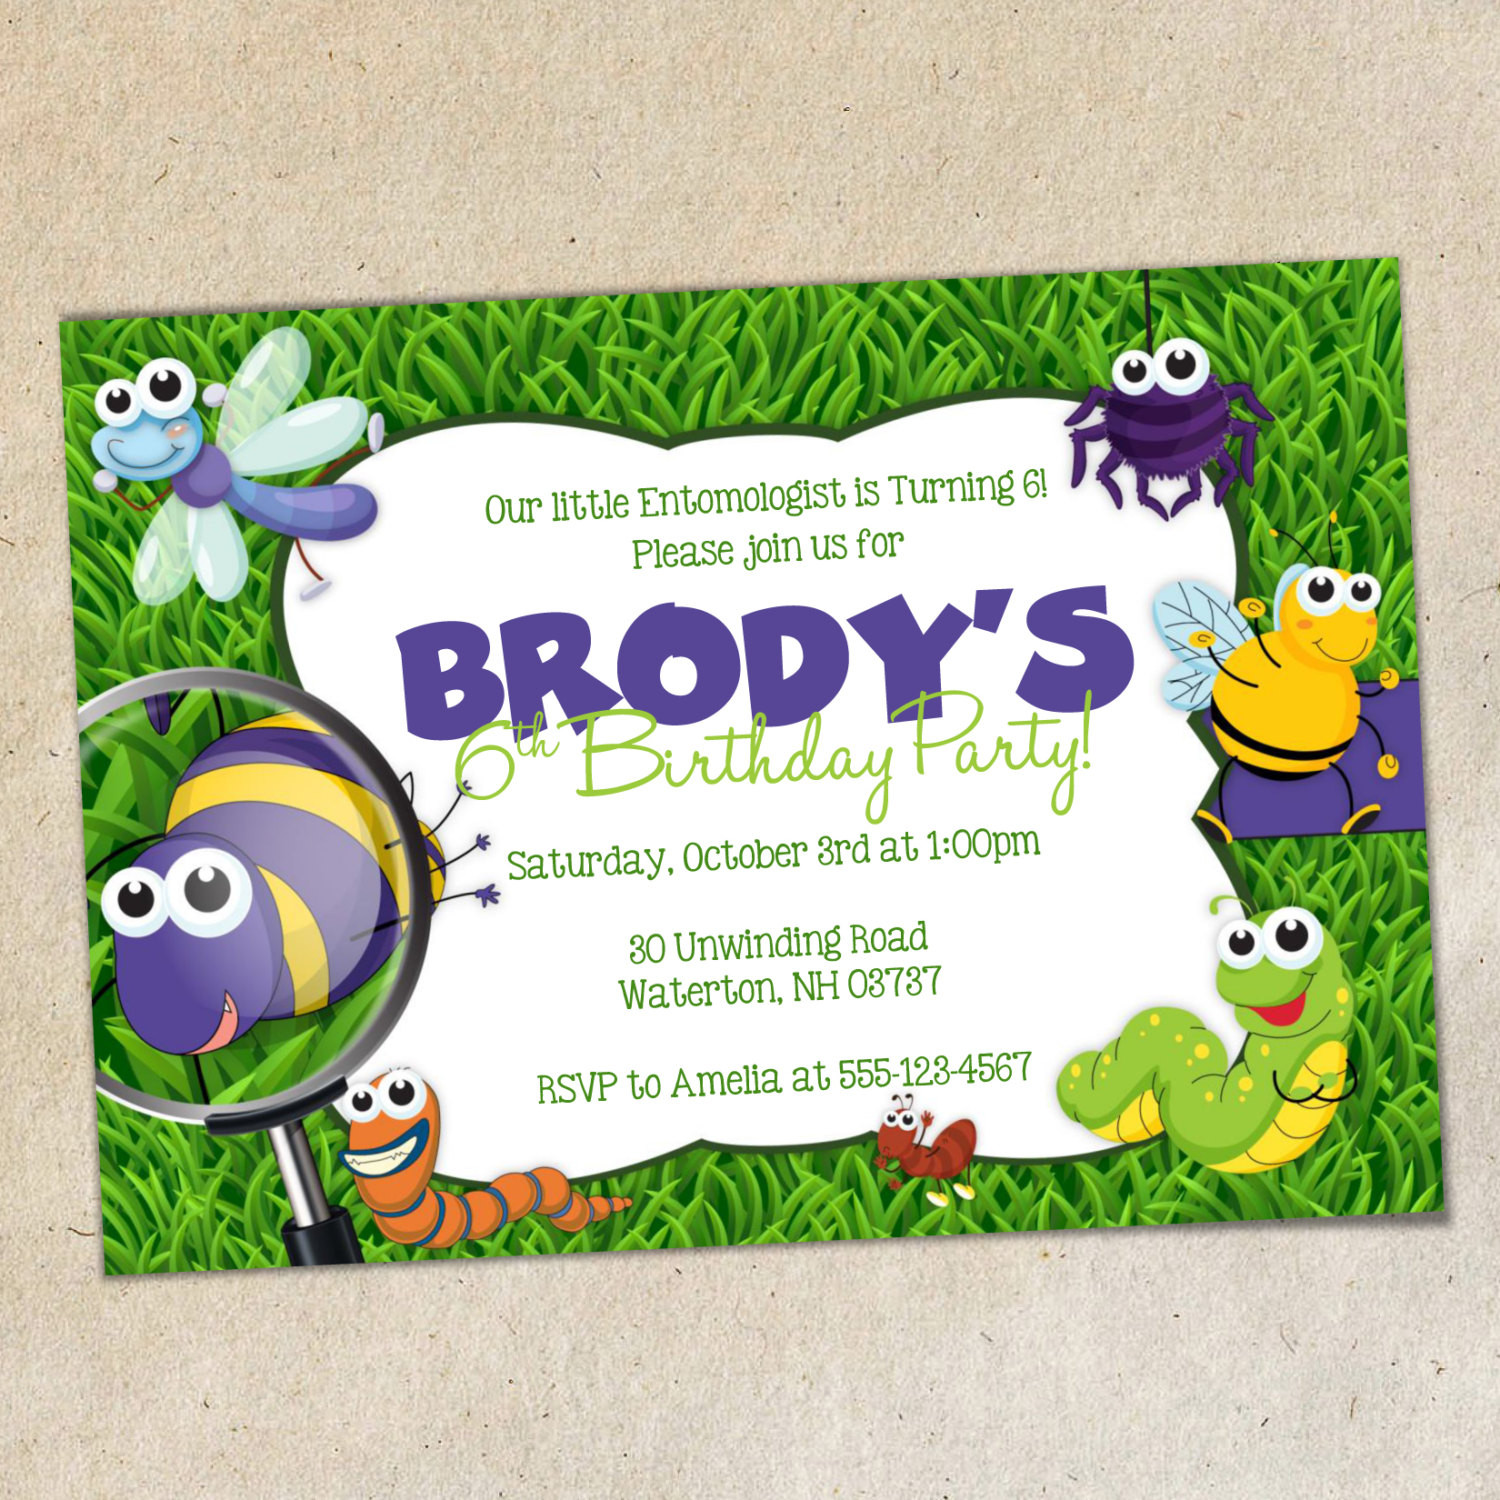 Bug Birthday Party Invitations
 Bugs Party Invitation TEMPLATE Insects Bug Party Invite